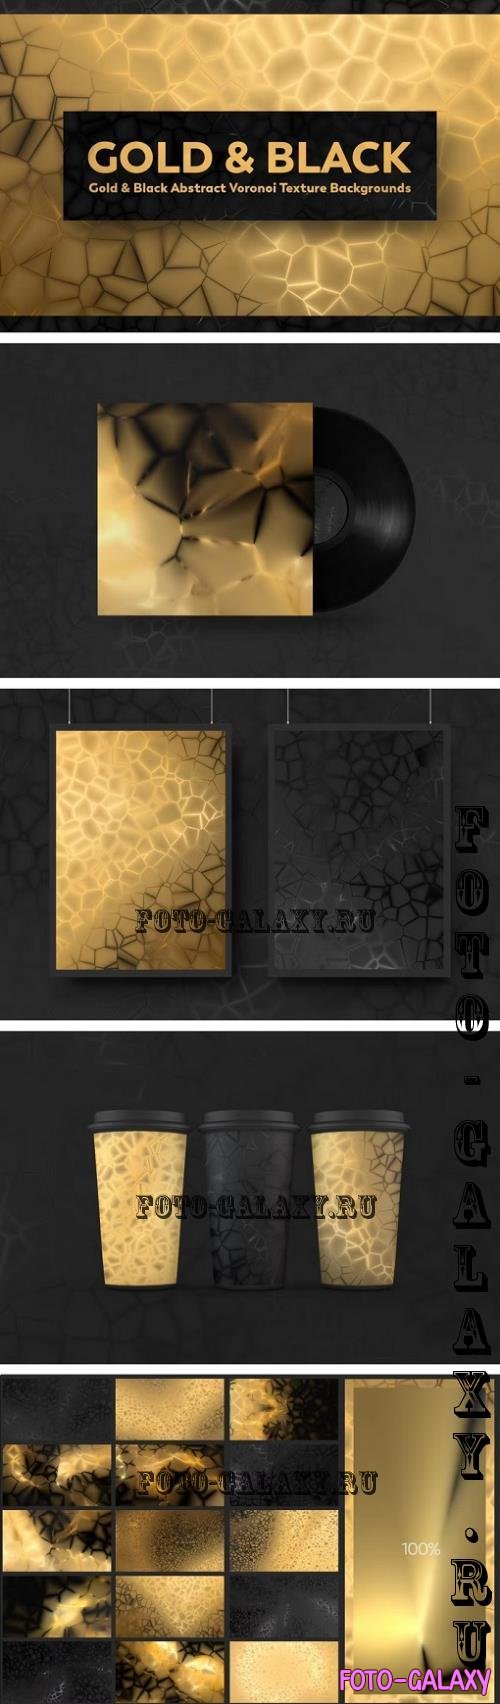 Gold & Black Abstract Voronoi Texture Backgrounds - S56AAY8